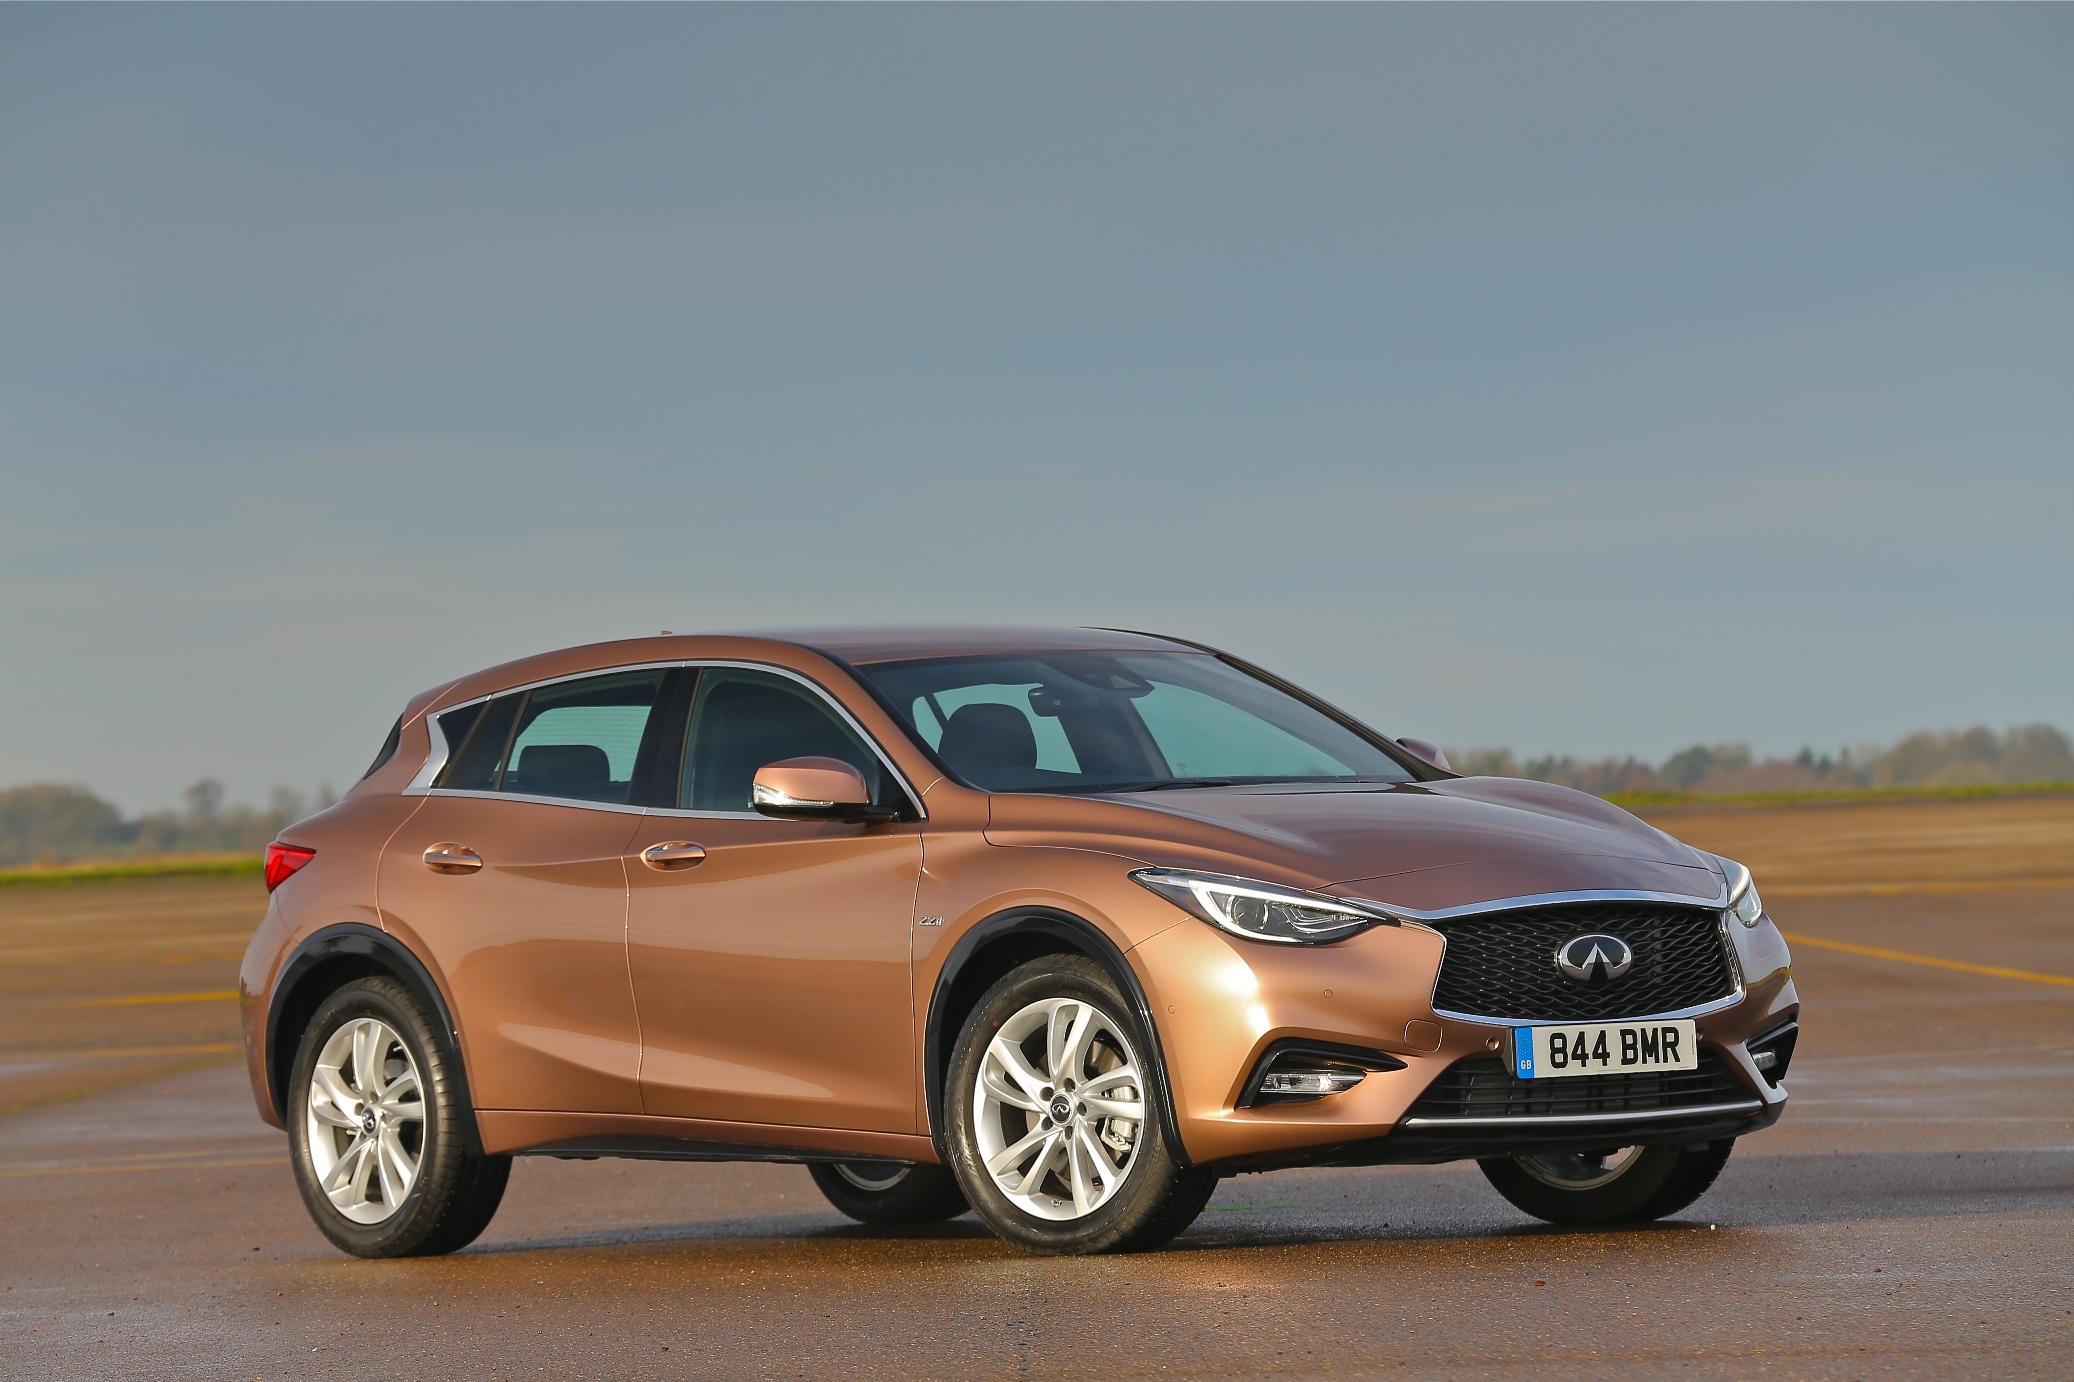 Grab special price on luxury compact crossover INFINITI Q30